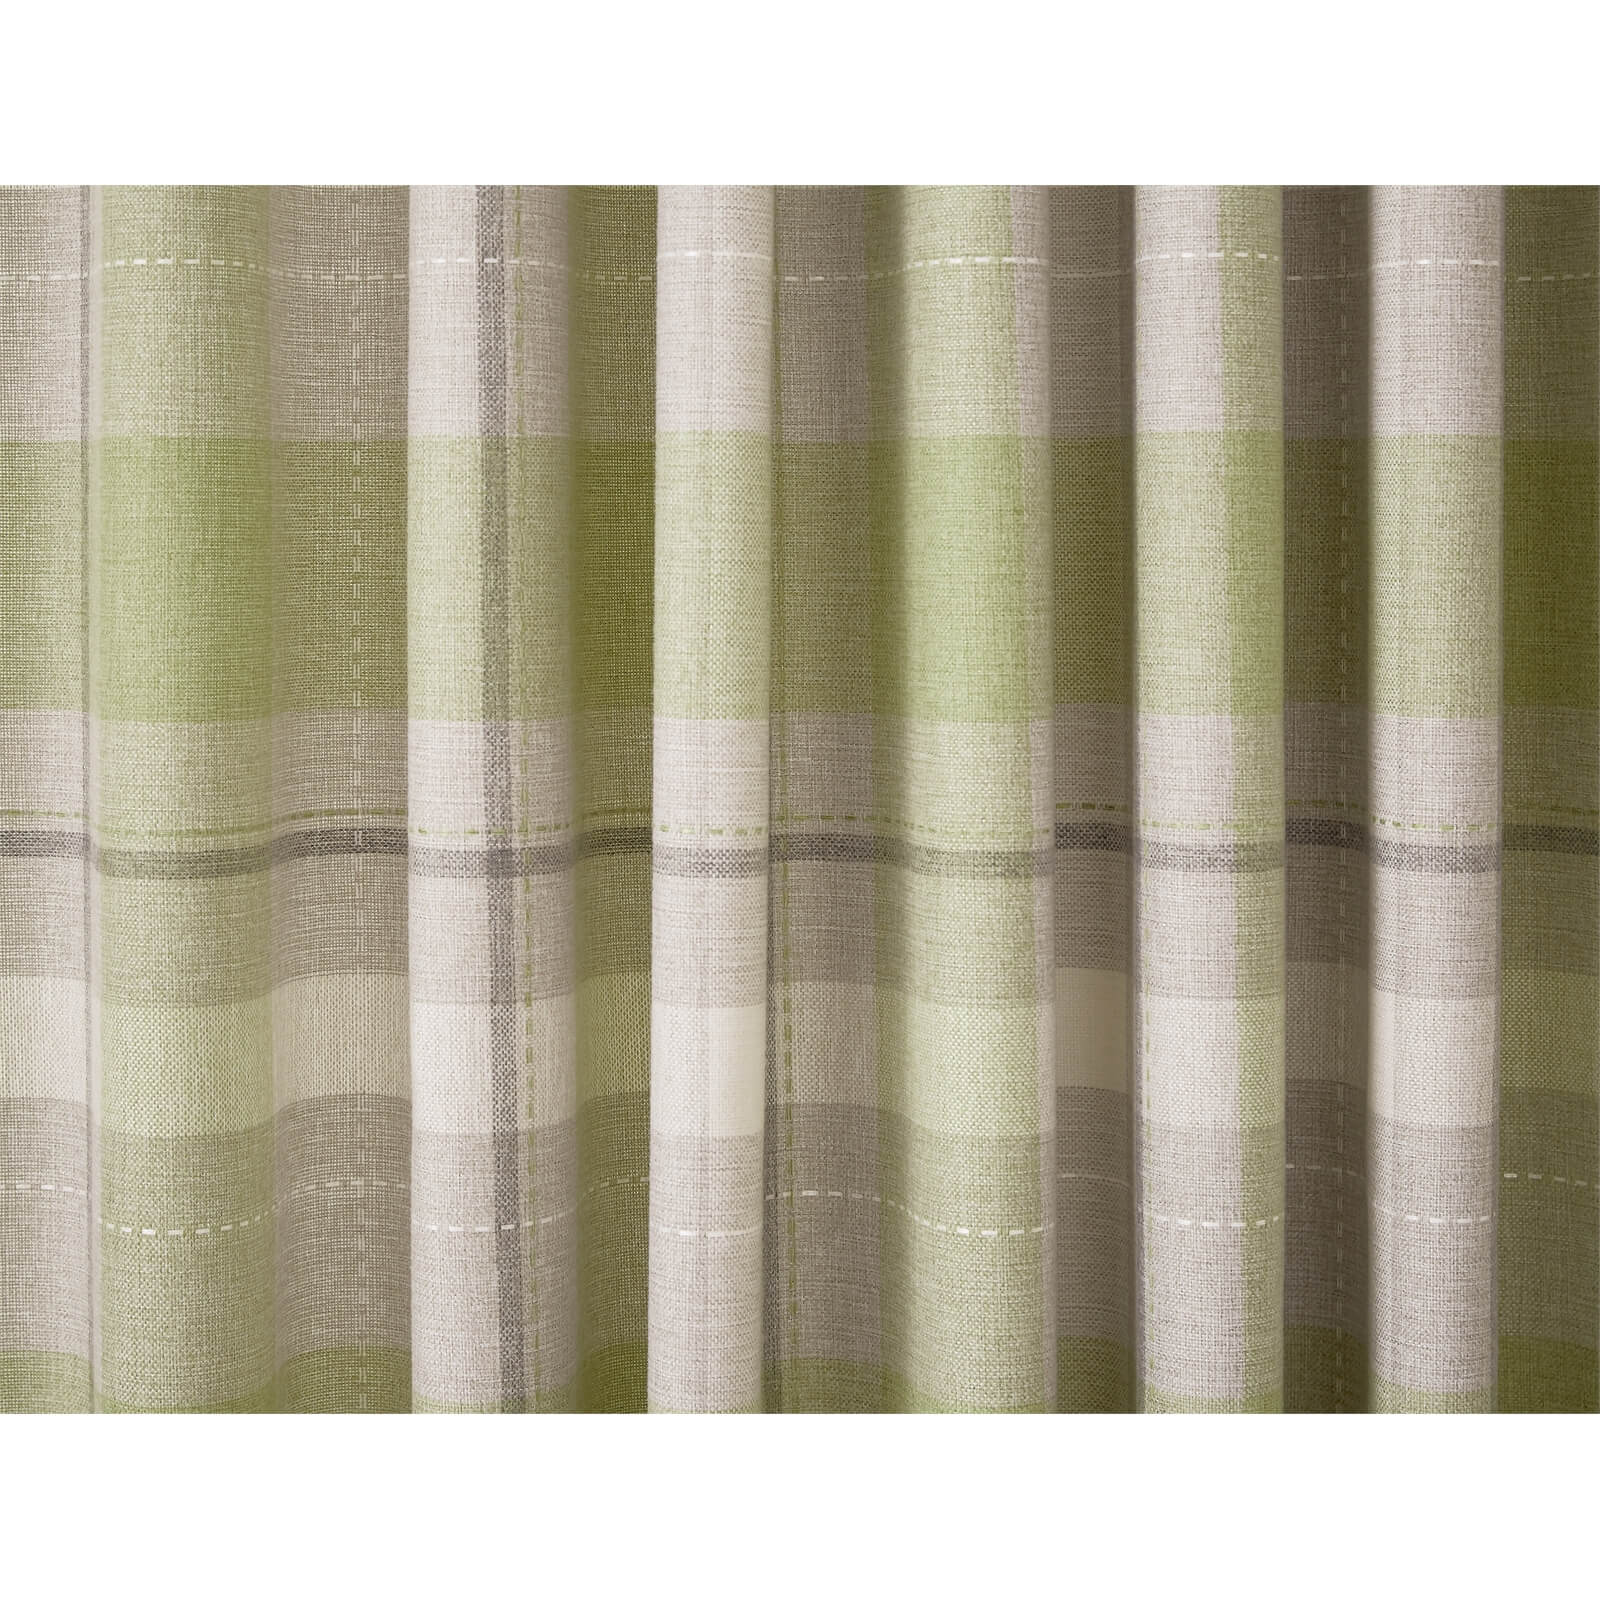 Helena Springfield Nora Lined Curtains 66 x 72 - Willow